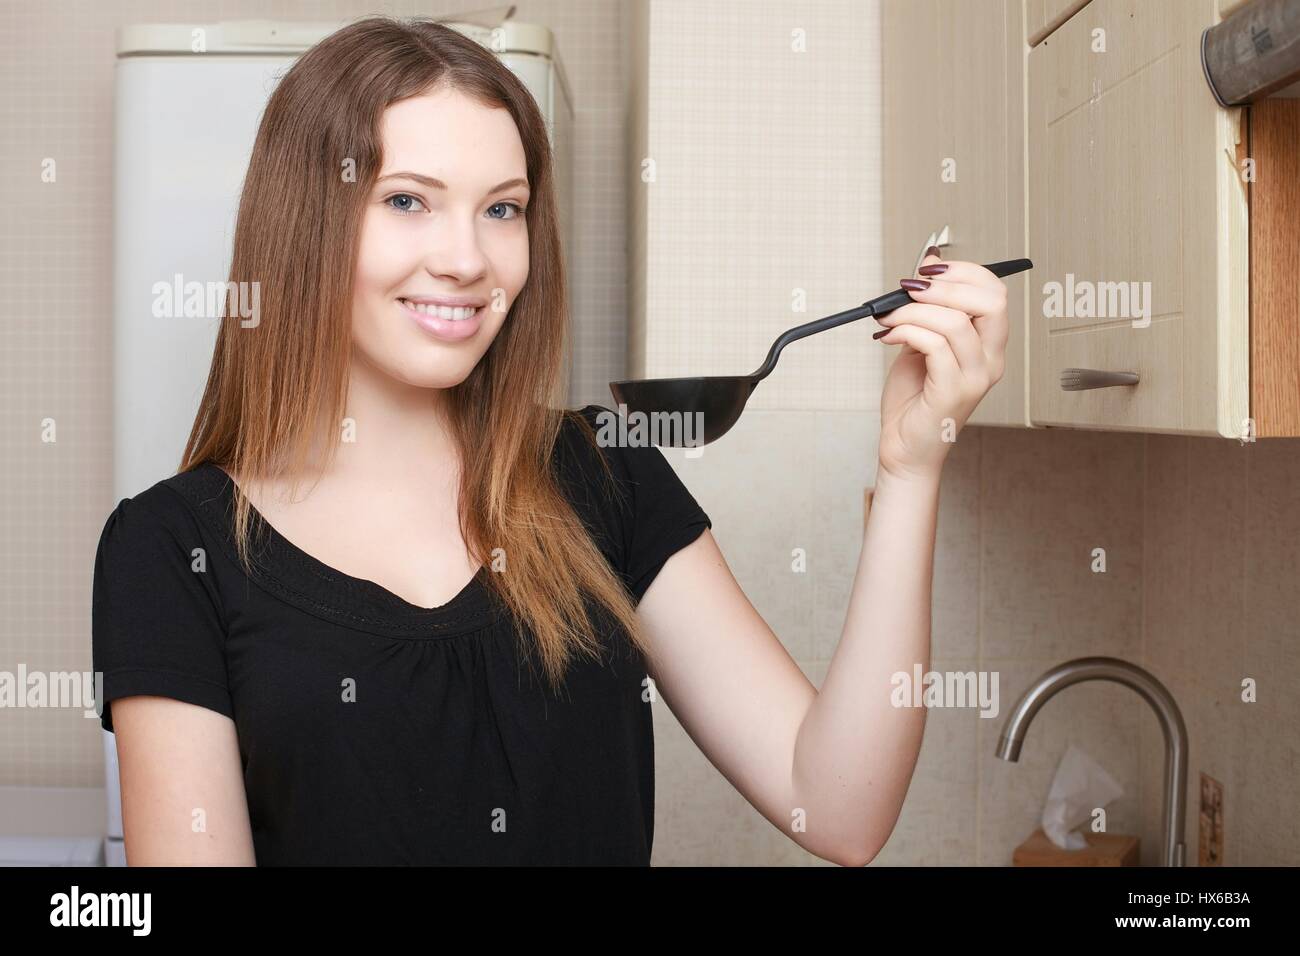 Housewife throwing out garbage in the kitchen opening a cupboard door Stock Photo